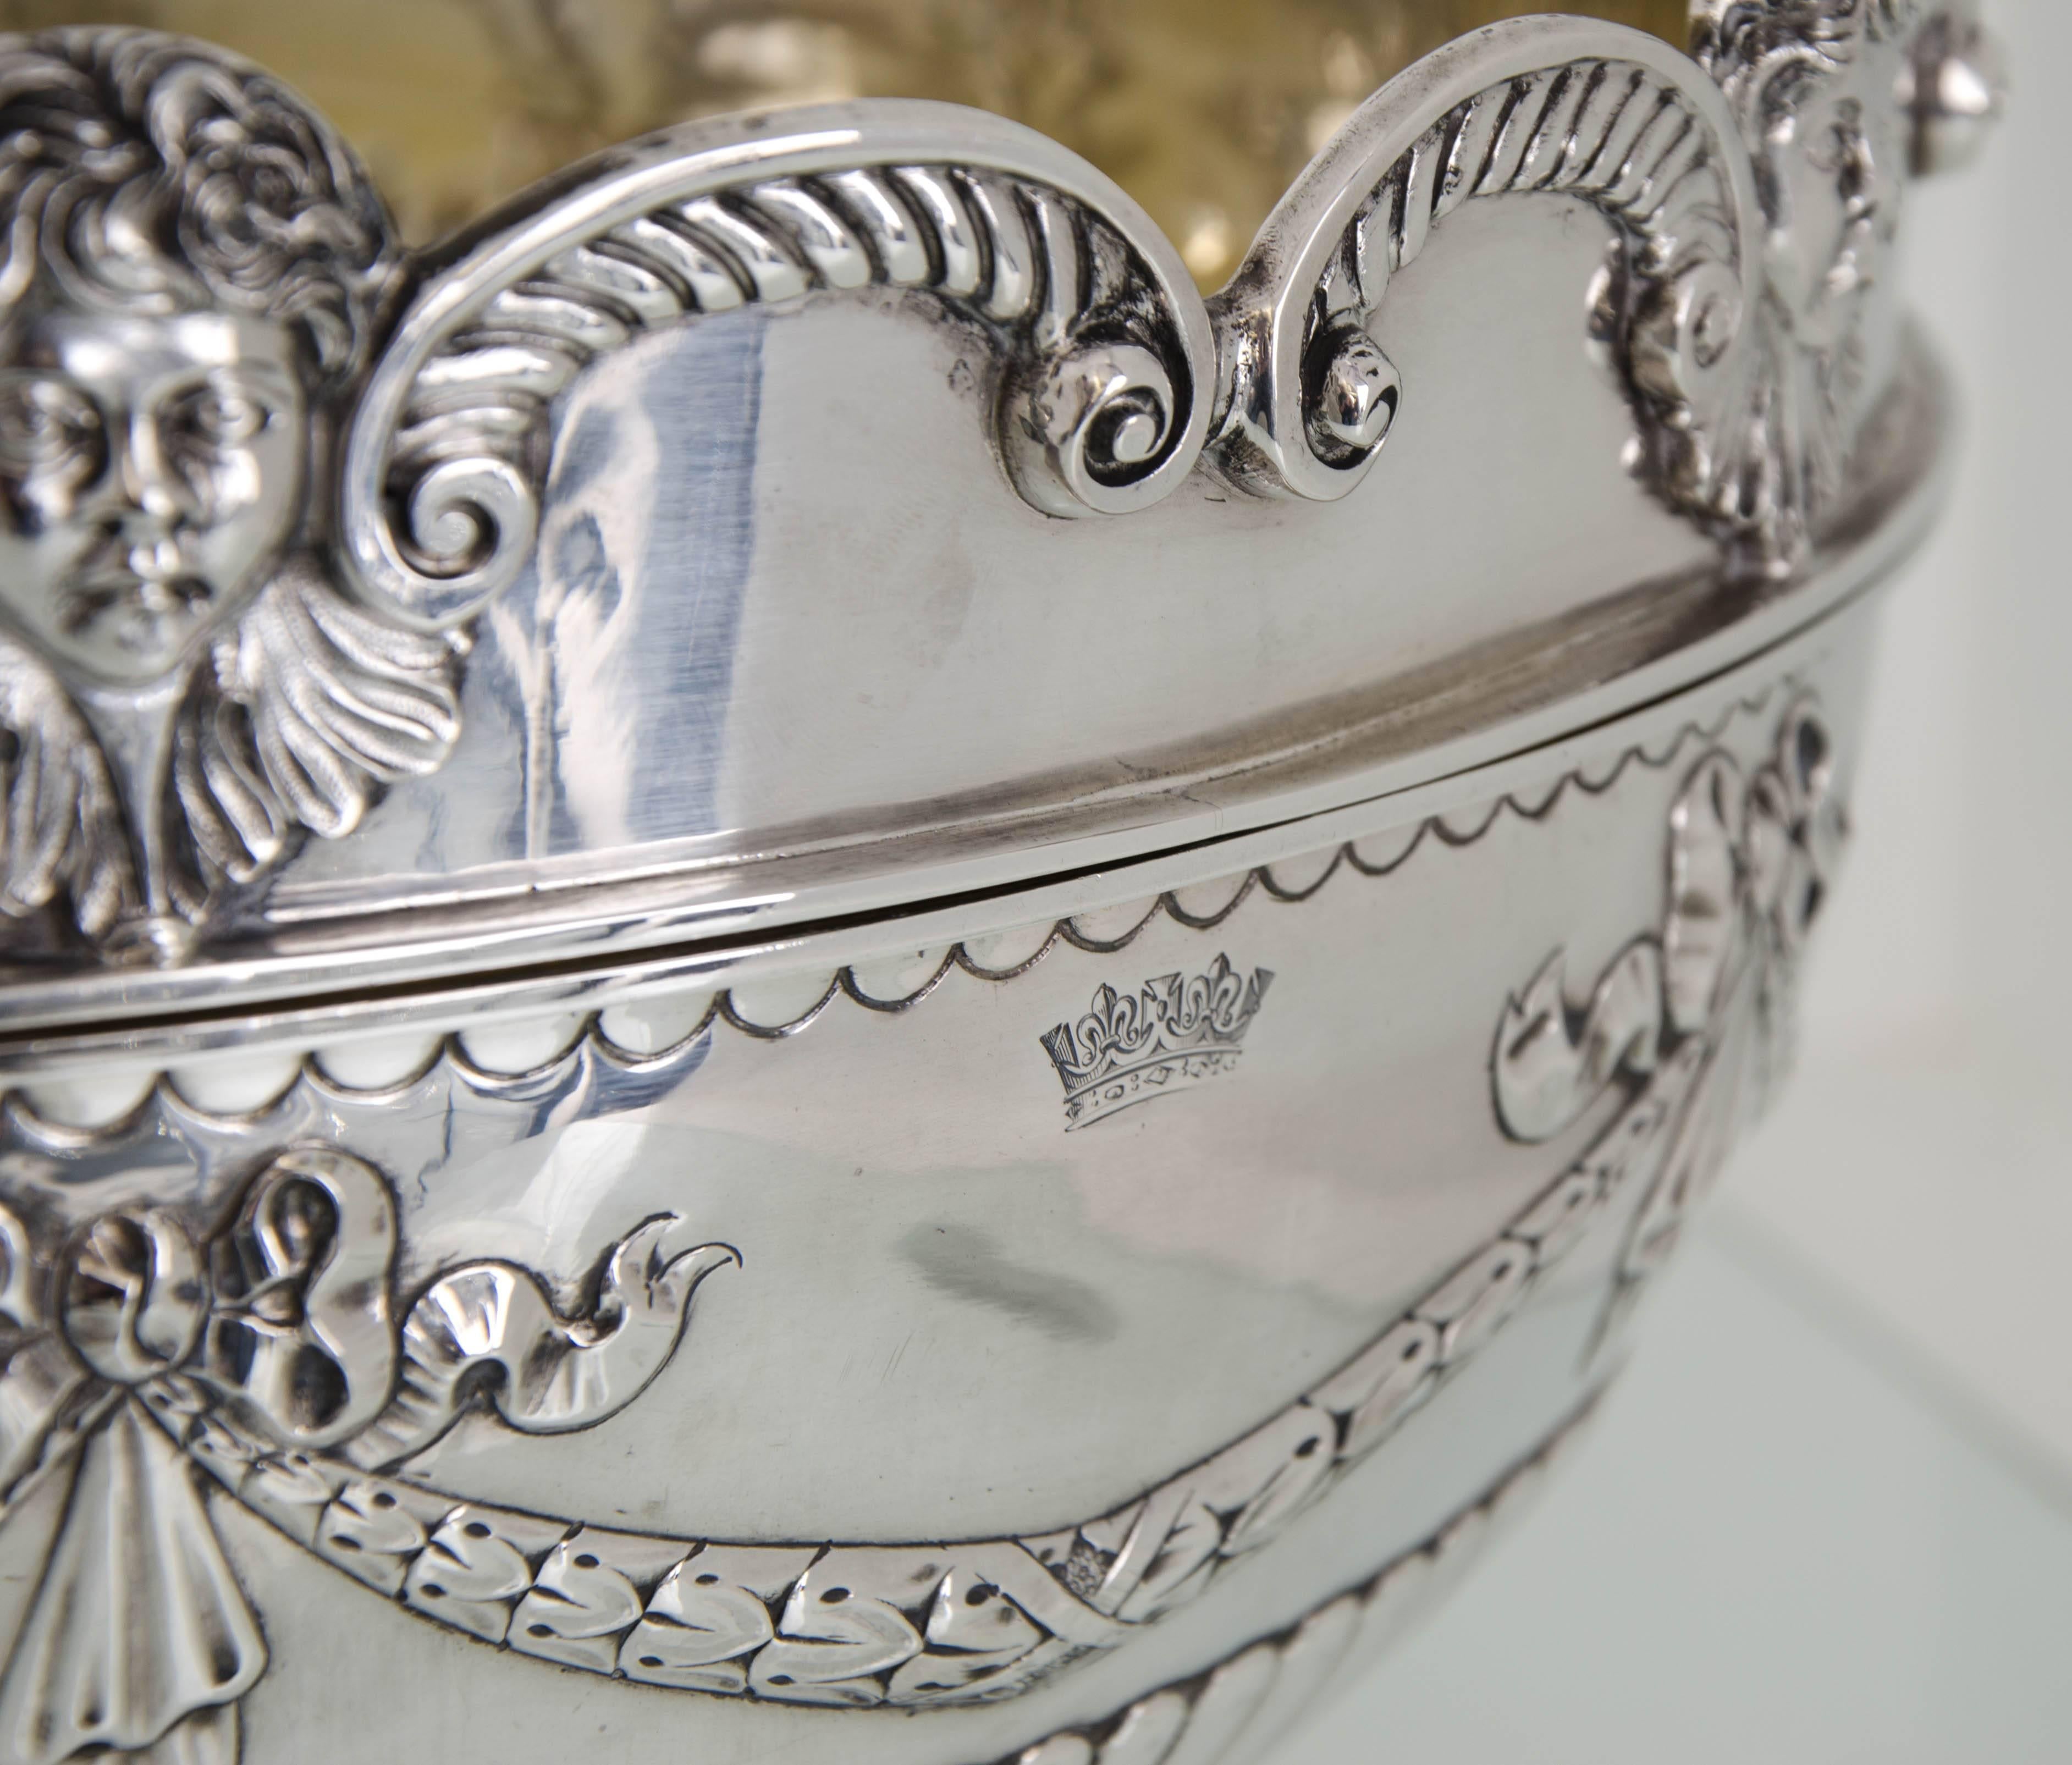 Victorian antique silver 19th century Monteith/Rose bowl London 1881 Aldwinkle & Slater

A very impressive Monteith bowl of exceptional size. The bowl is half fluted throughout in design with garlands and ribbons for decorative highlights. The rim